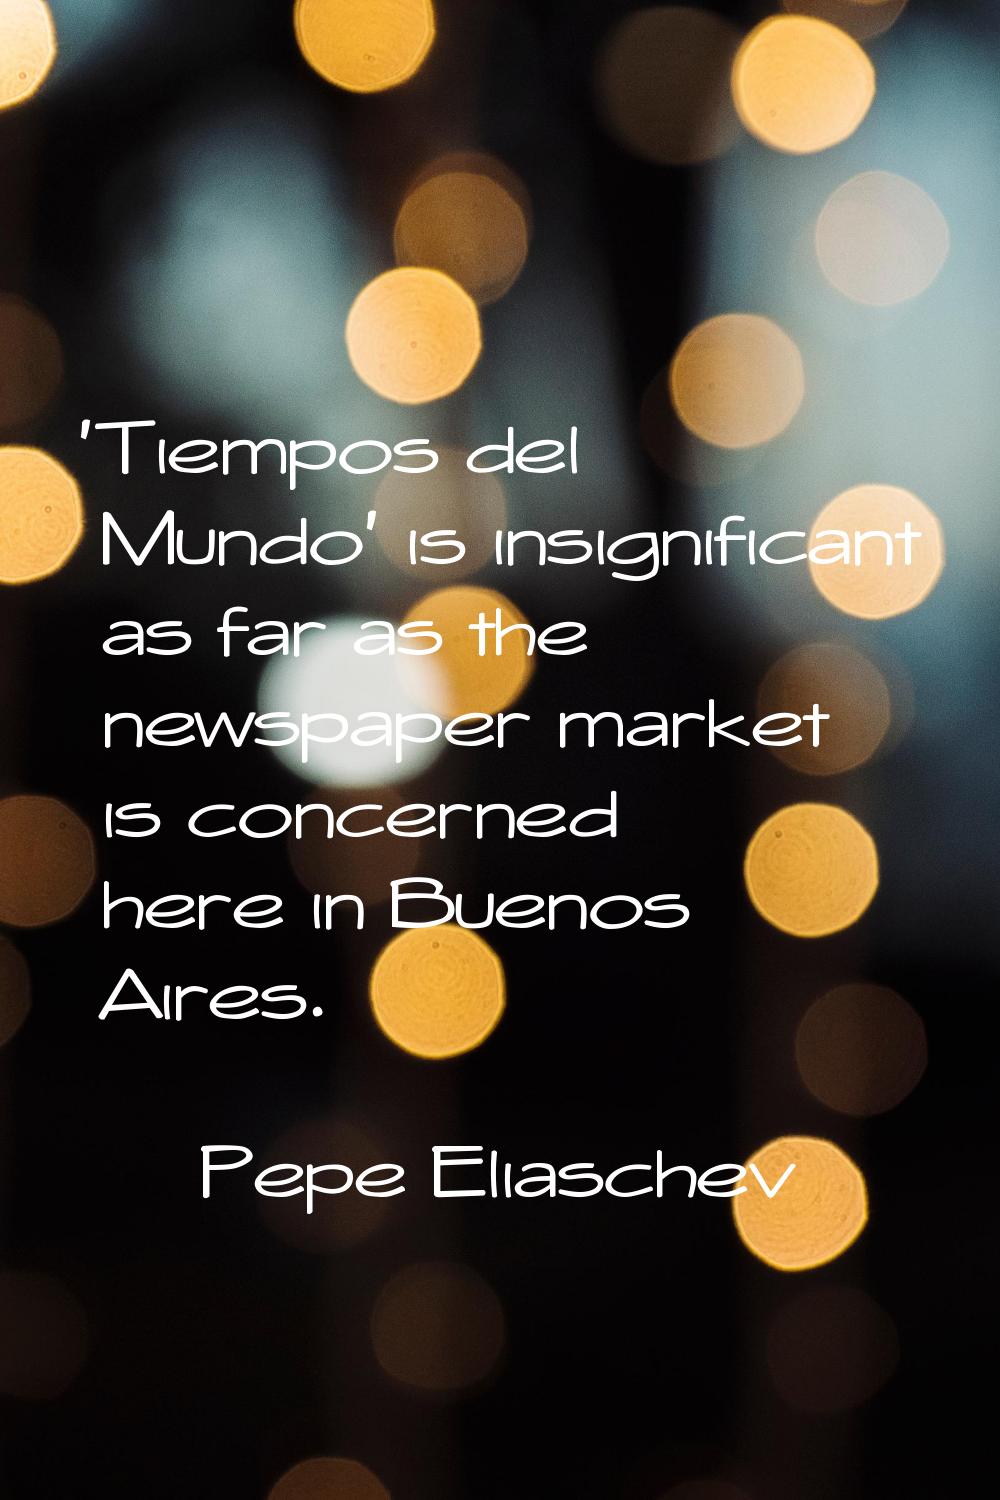 'Tiempos del Mundo' is insignificant as far as the newspaper market is concerned here in Buenos Air